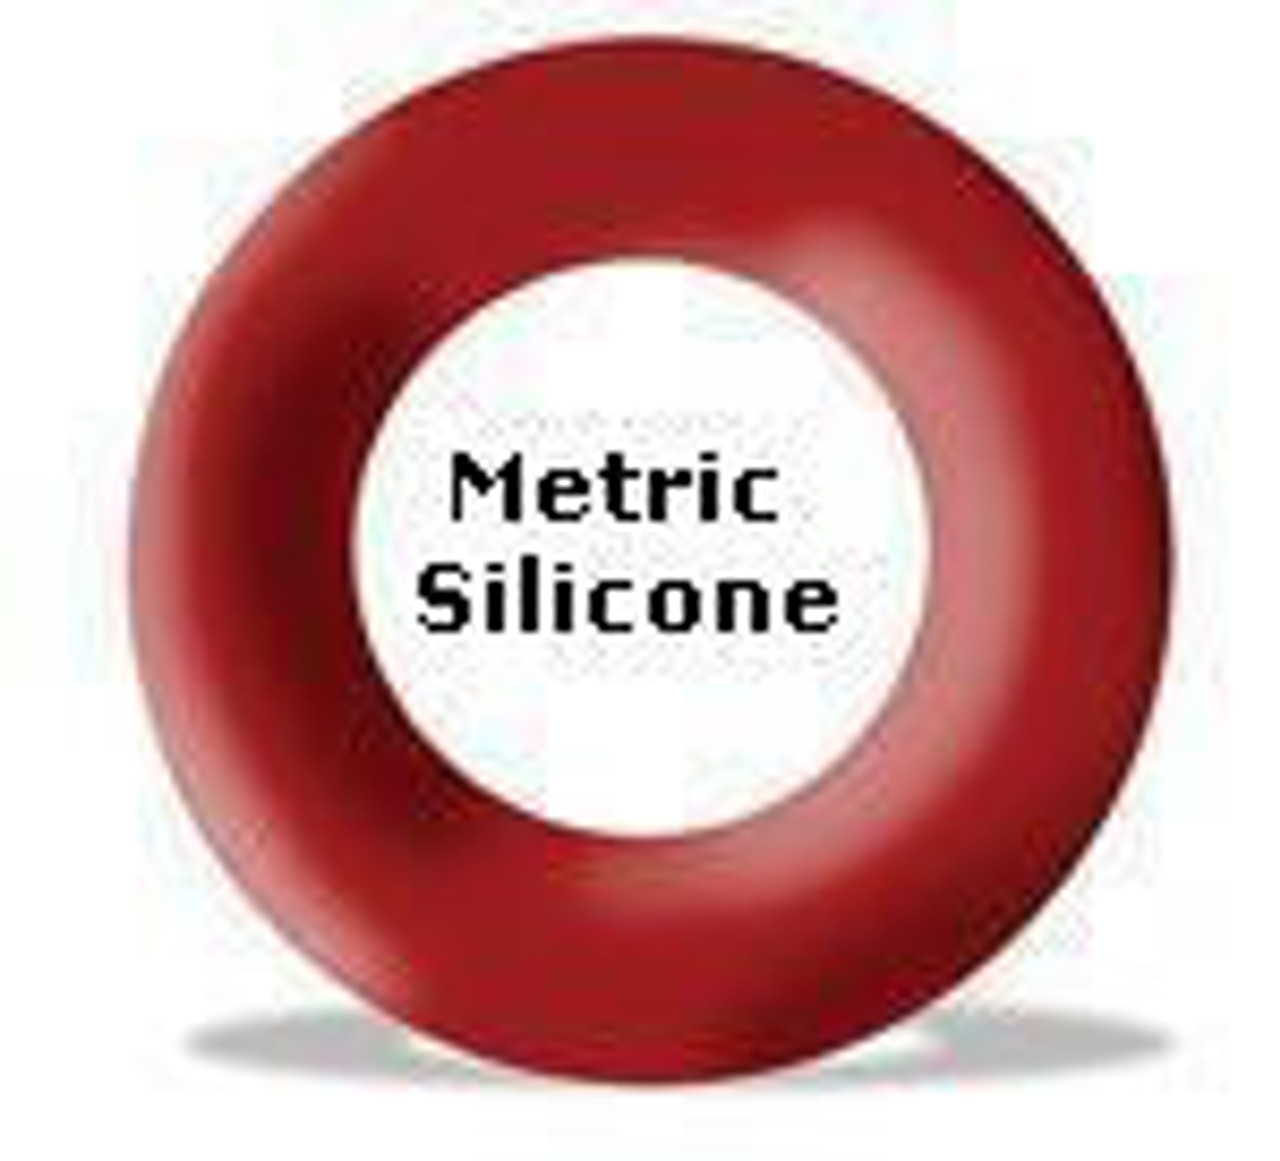 Silicone O-rings 234.62 x 2.62mm Price for 1 pc